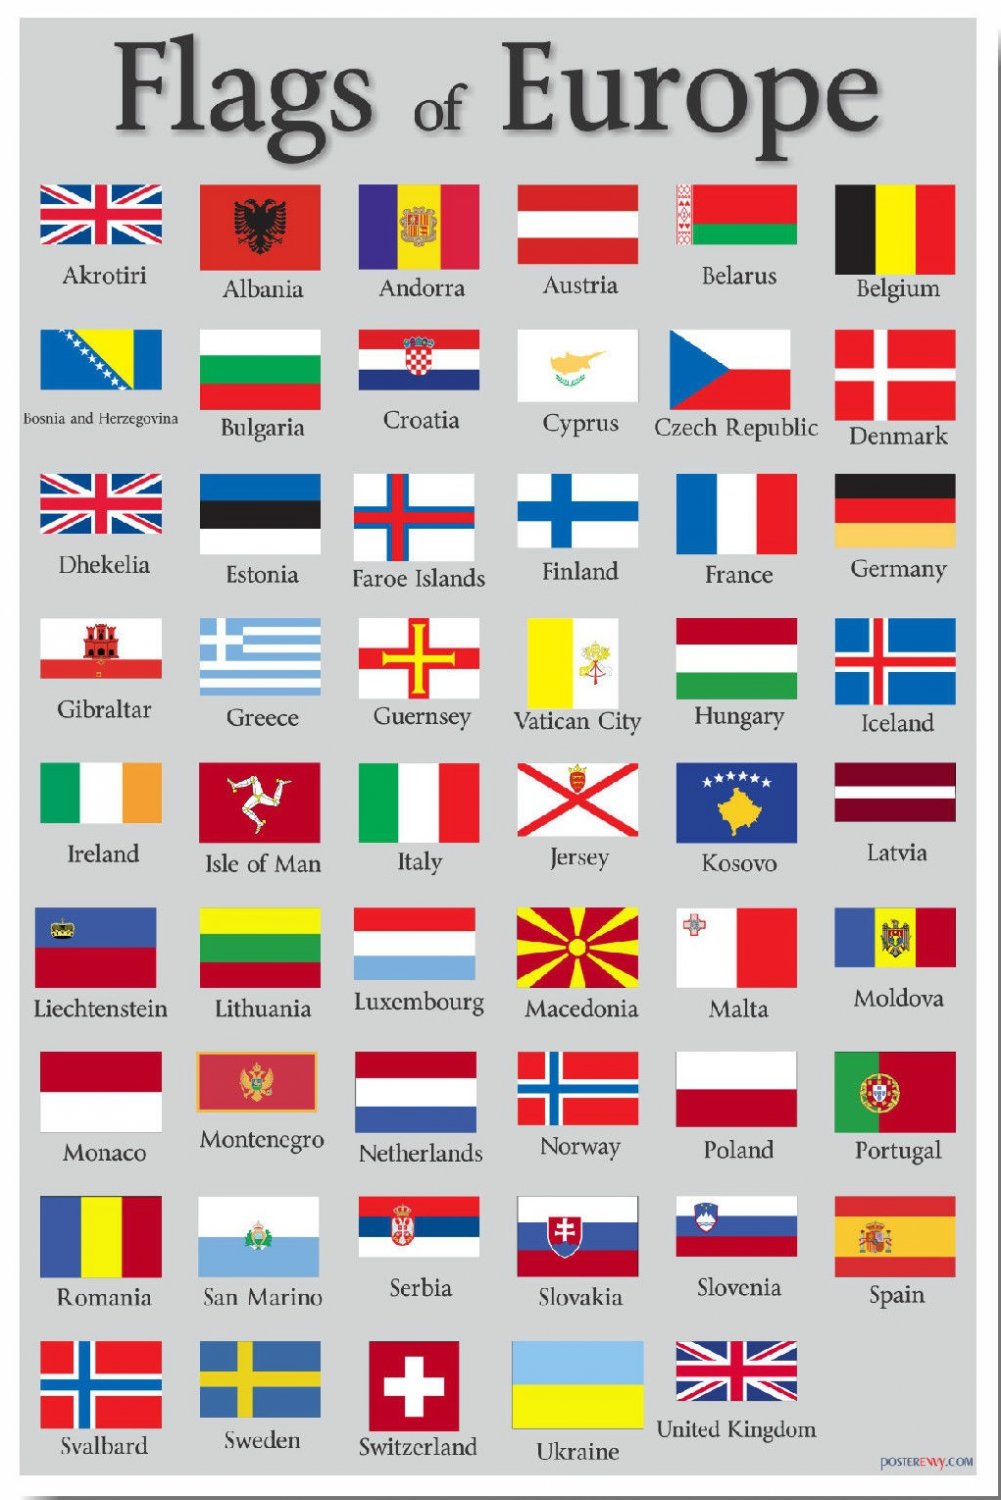 Flags of Europe Poster 13x19 inches